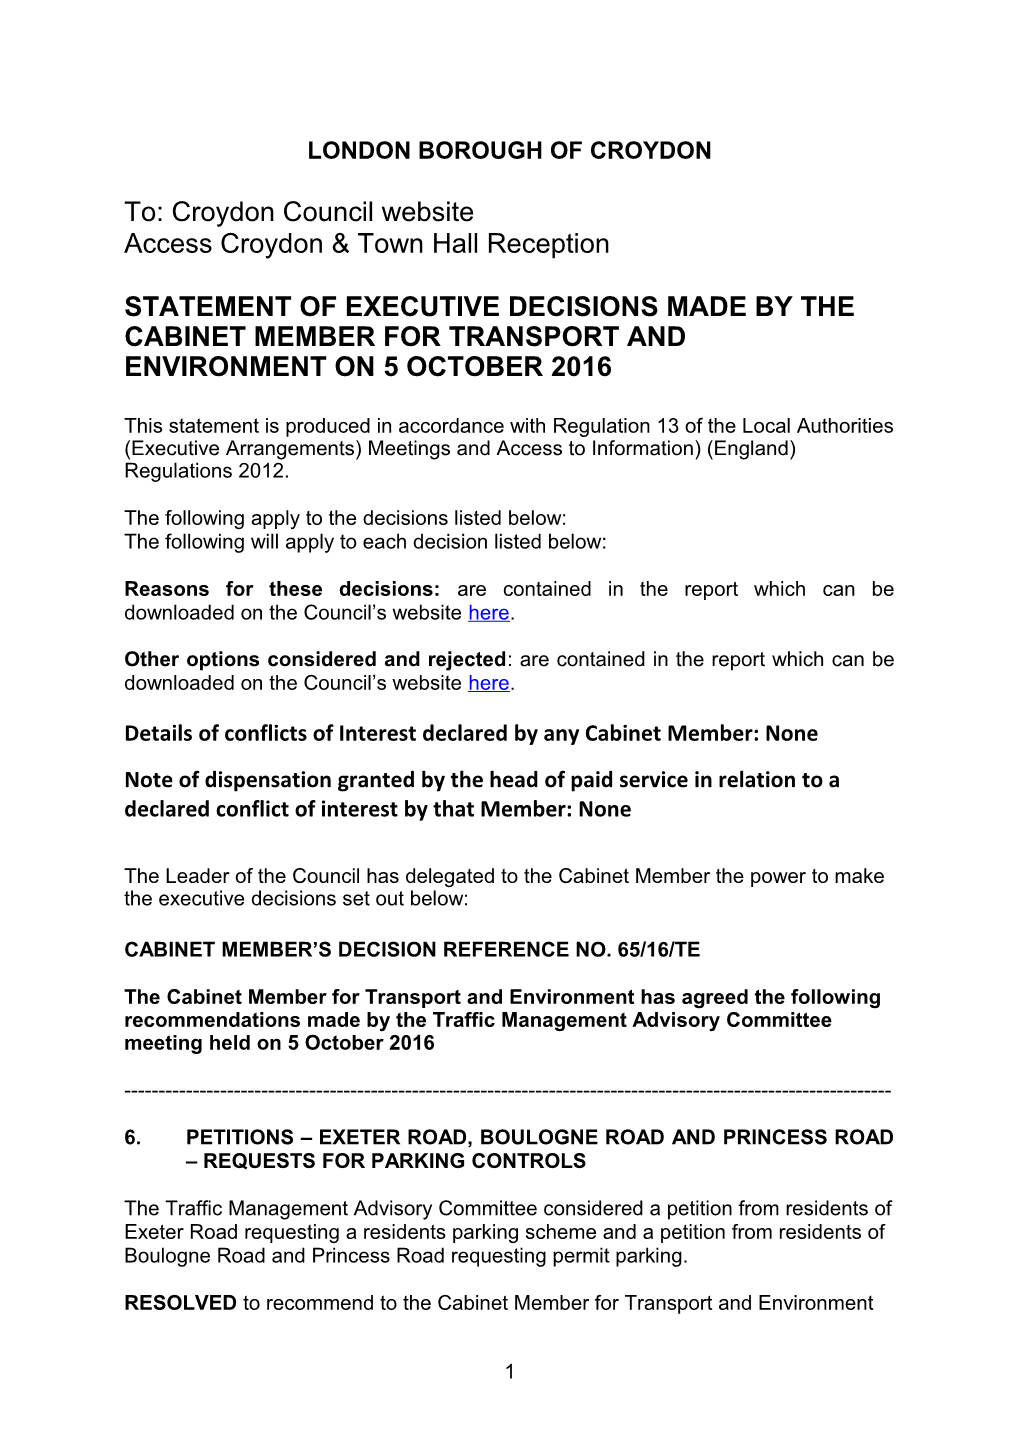 TE TEMPLATE Statement of Executive Decisions Made by the Cabinet Member